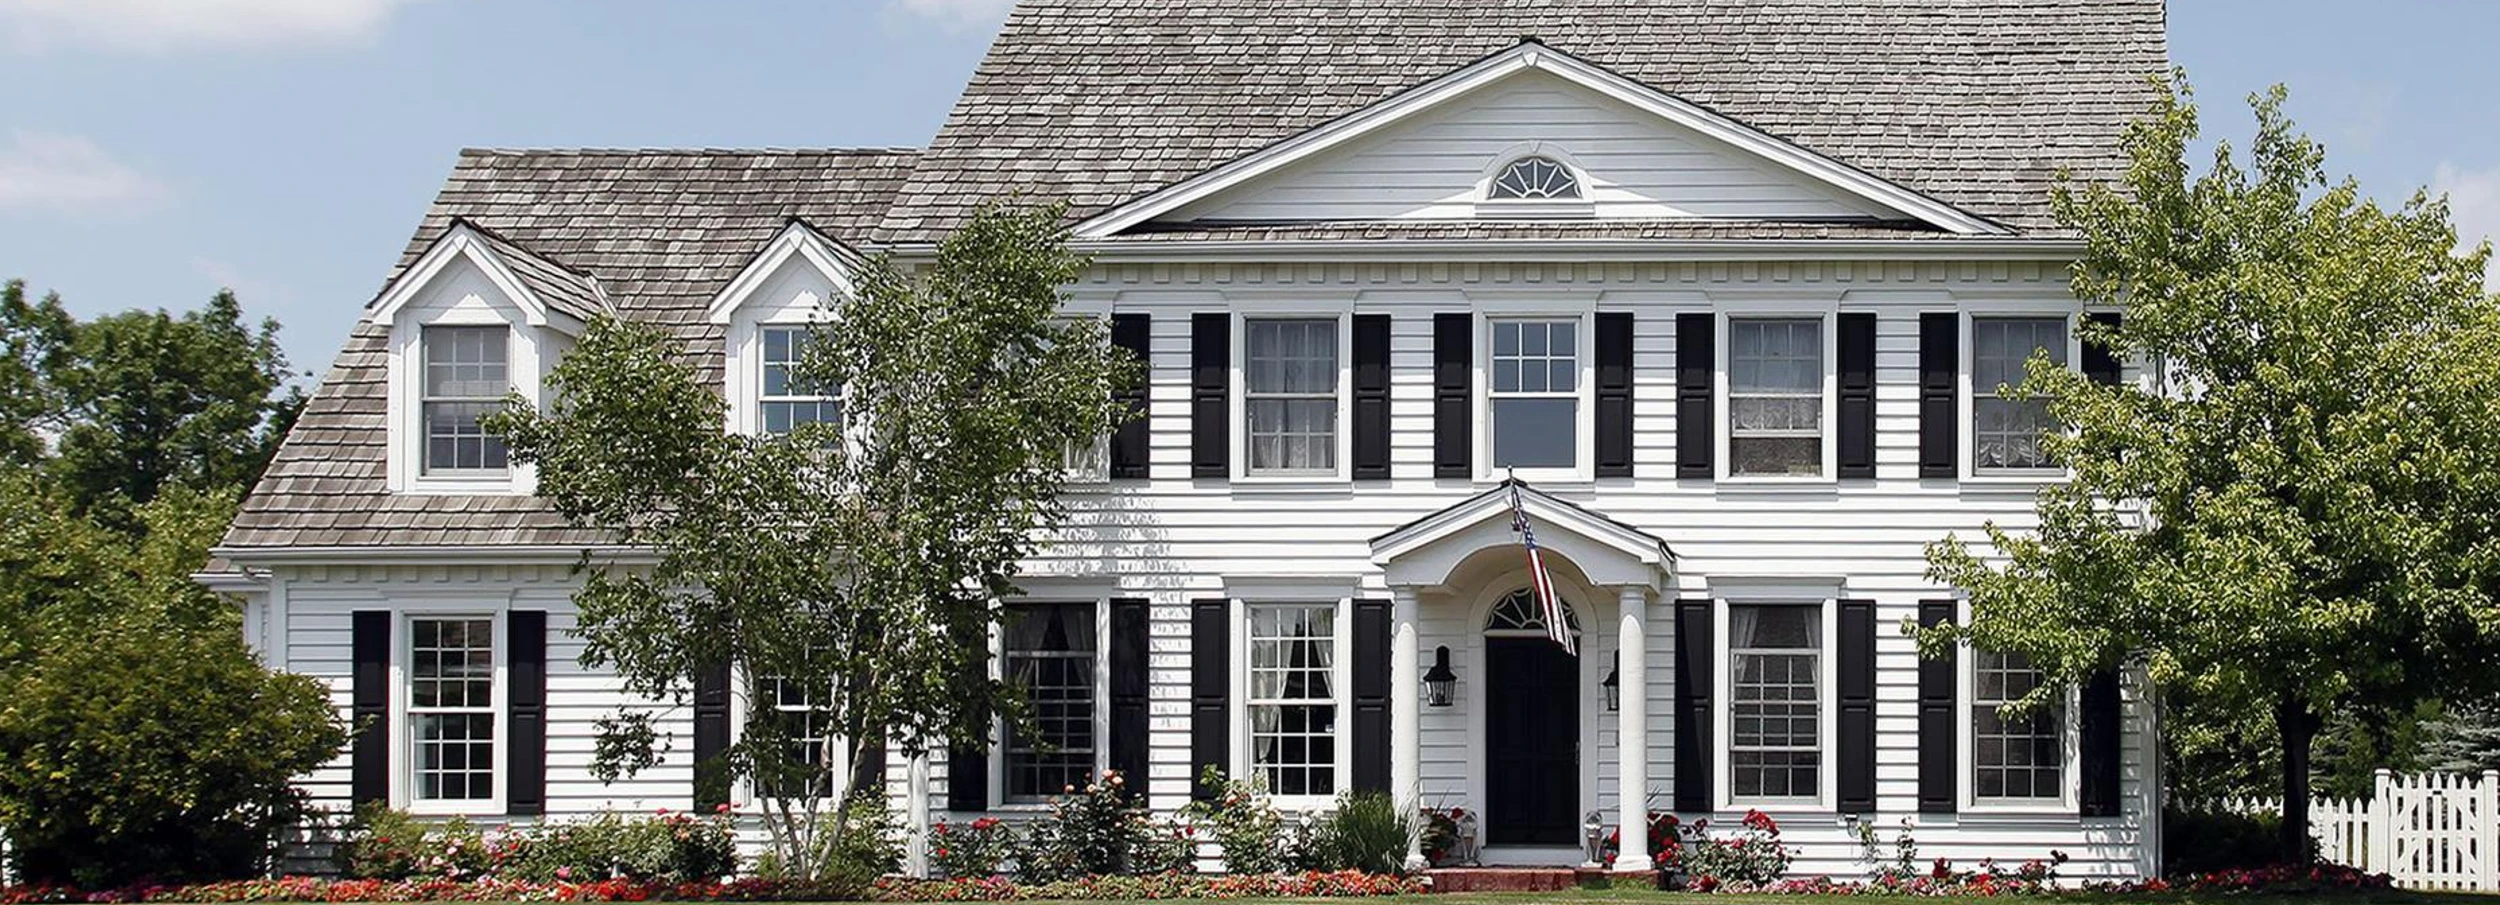 Exterior of a large white home with black shutters.